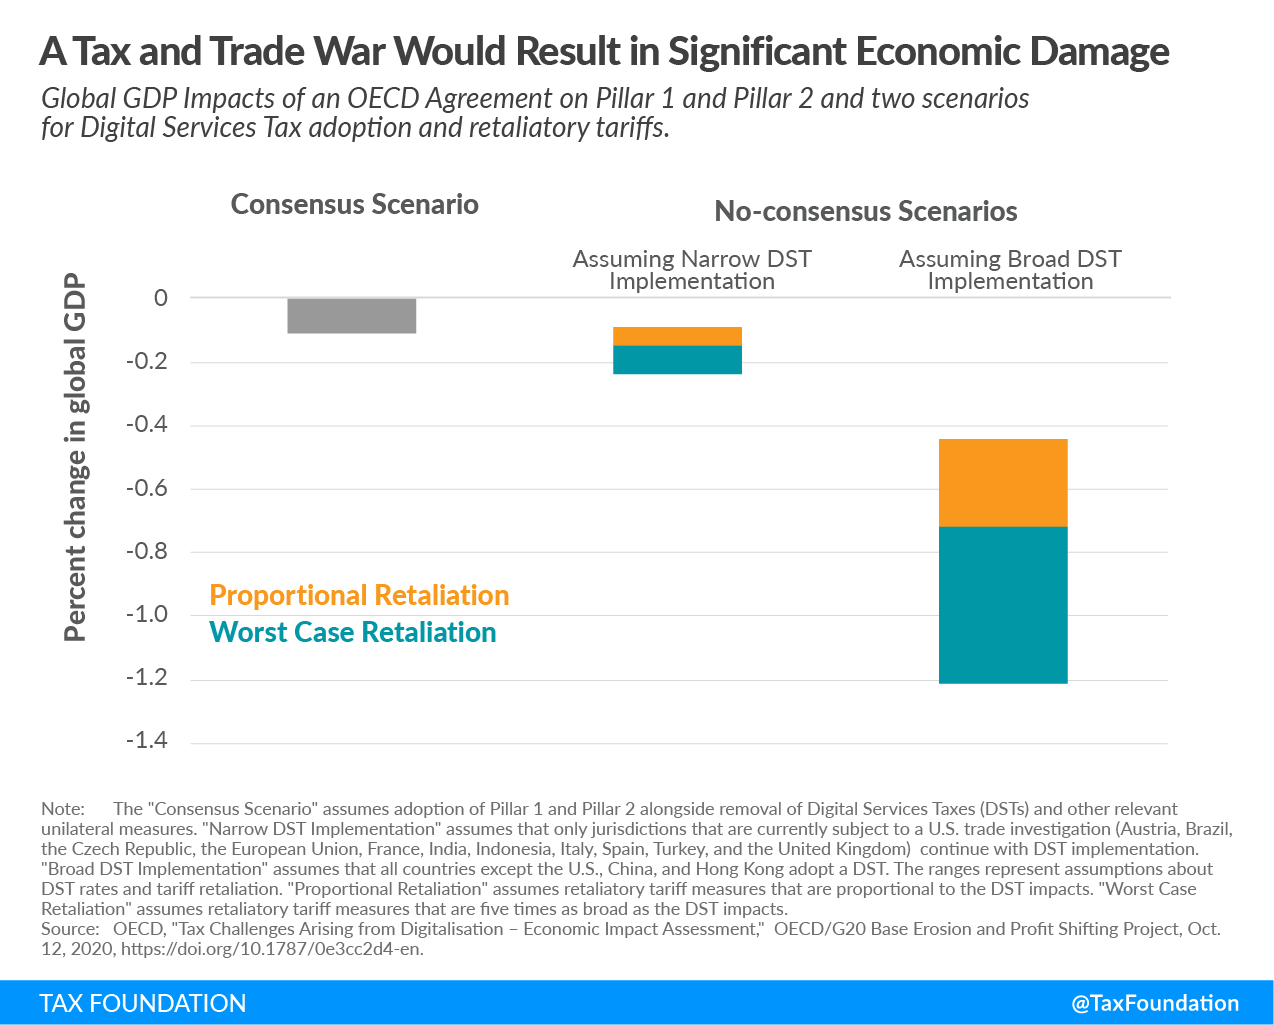 A tax and trade war would result in significant economic damage. OECD Pillar 1 OECD Pillar 2 OECD BEPS OECD impact assessment, digital services tax adoption and retaliatory tariffs